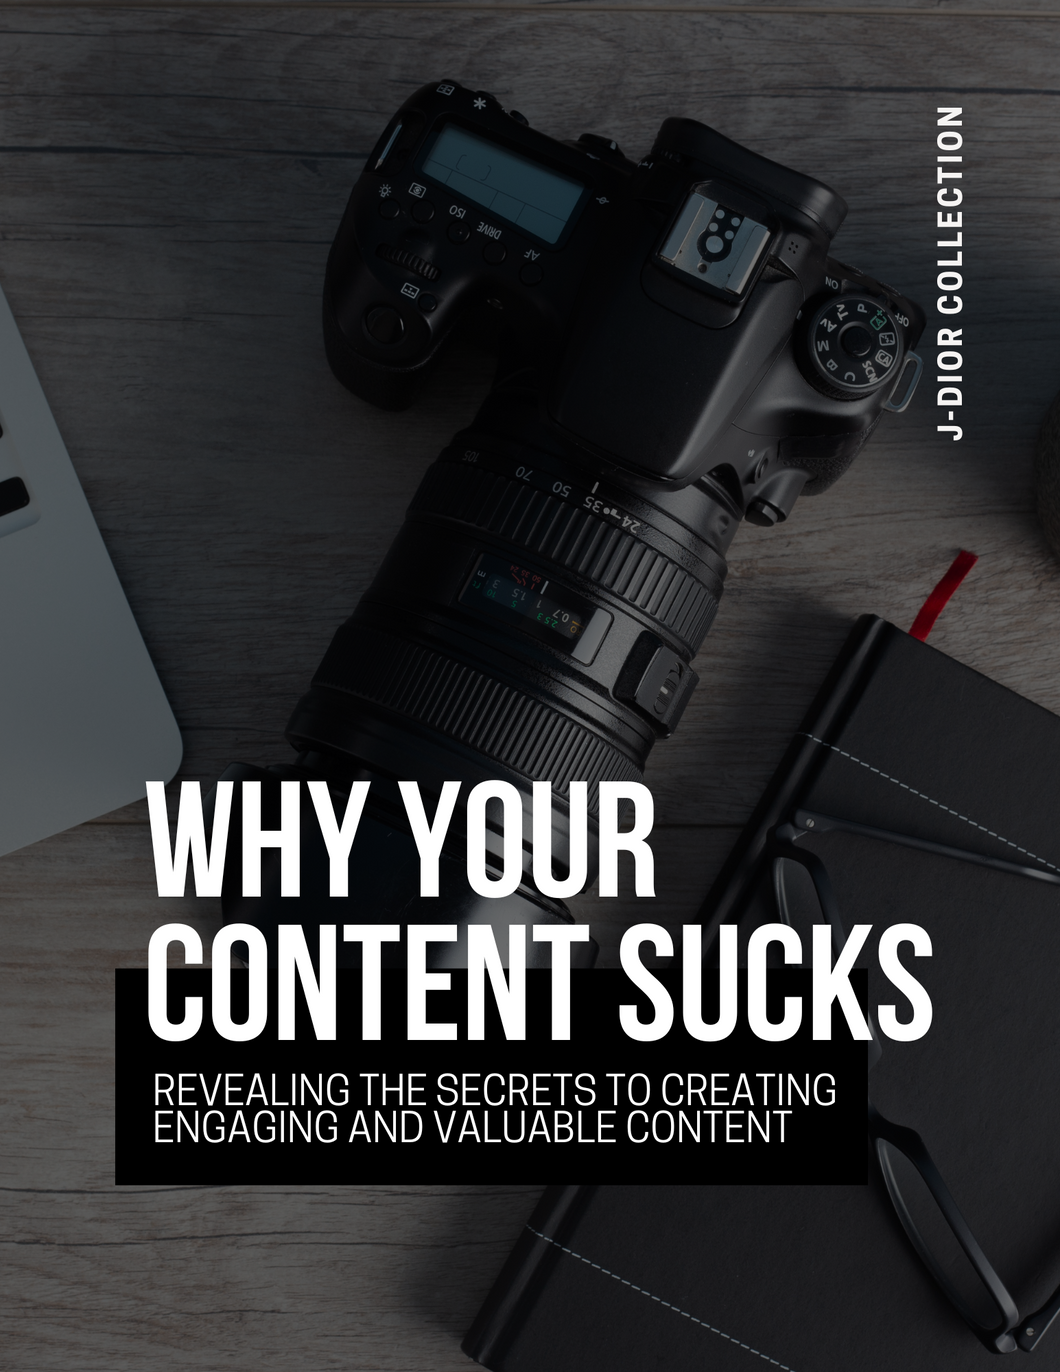 WHY YOUR CONTENT SUCKS